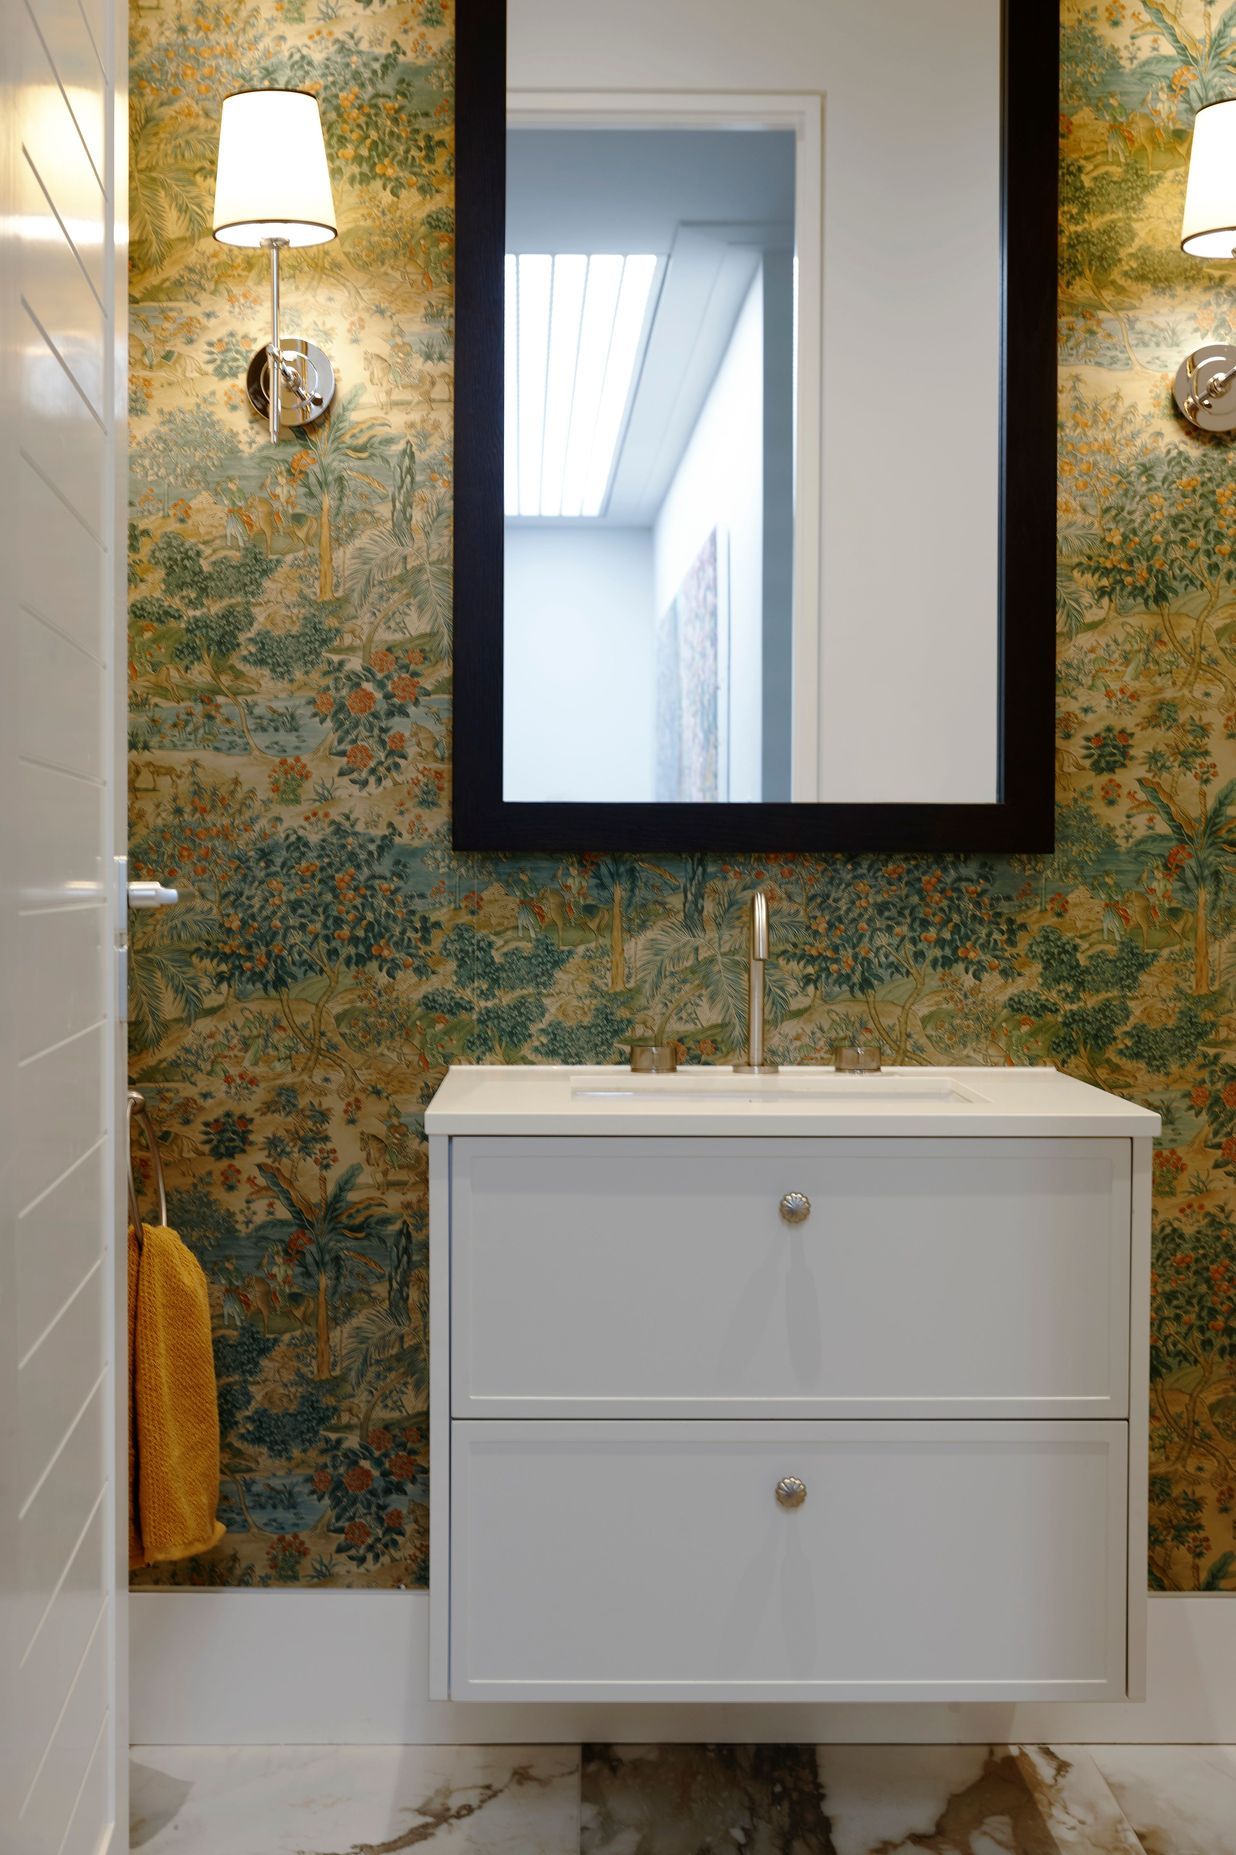 The powder room in this Remuera home features ornate wallpaper to create an elegant, stately feel.